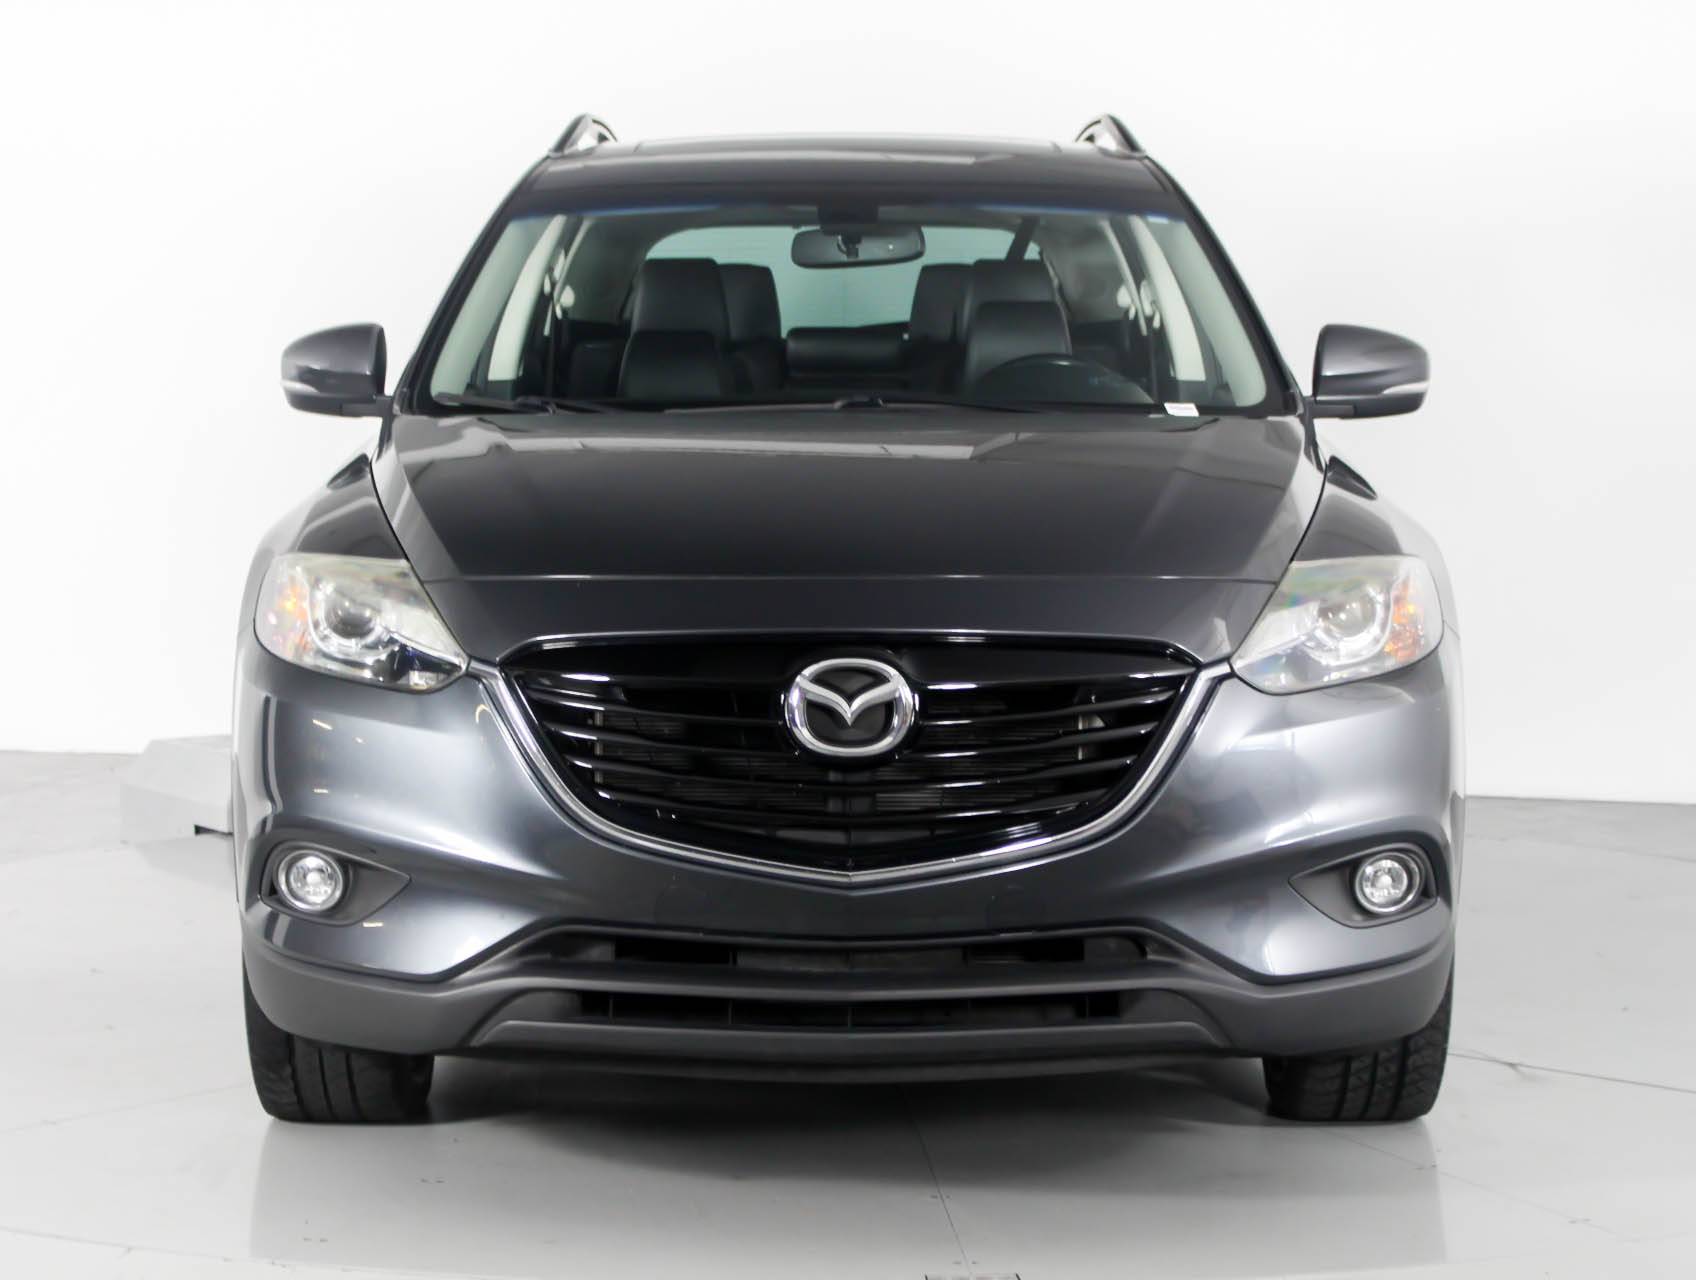 Florida Fine Cars - Used MAZDA CX 9 2014 WEST PALM GRAND TOURING